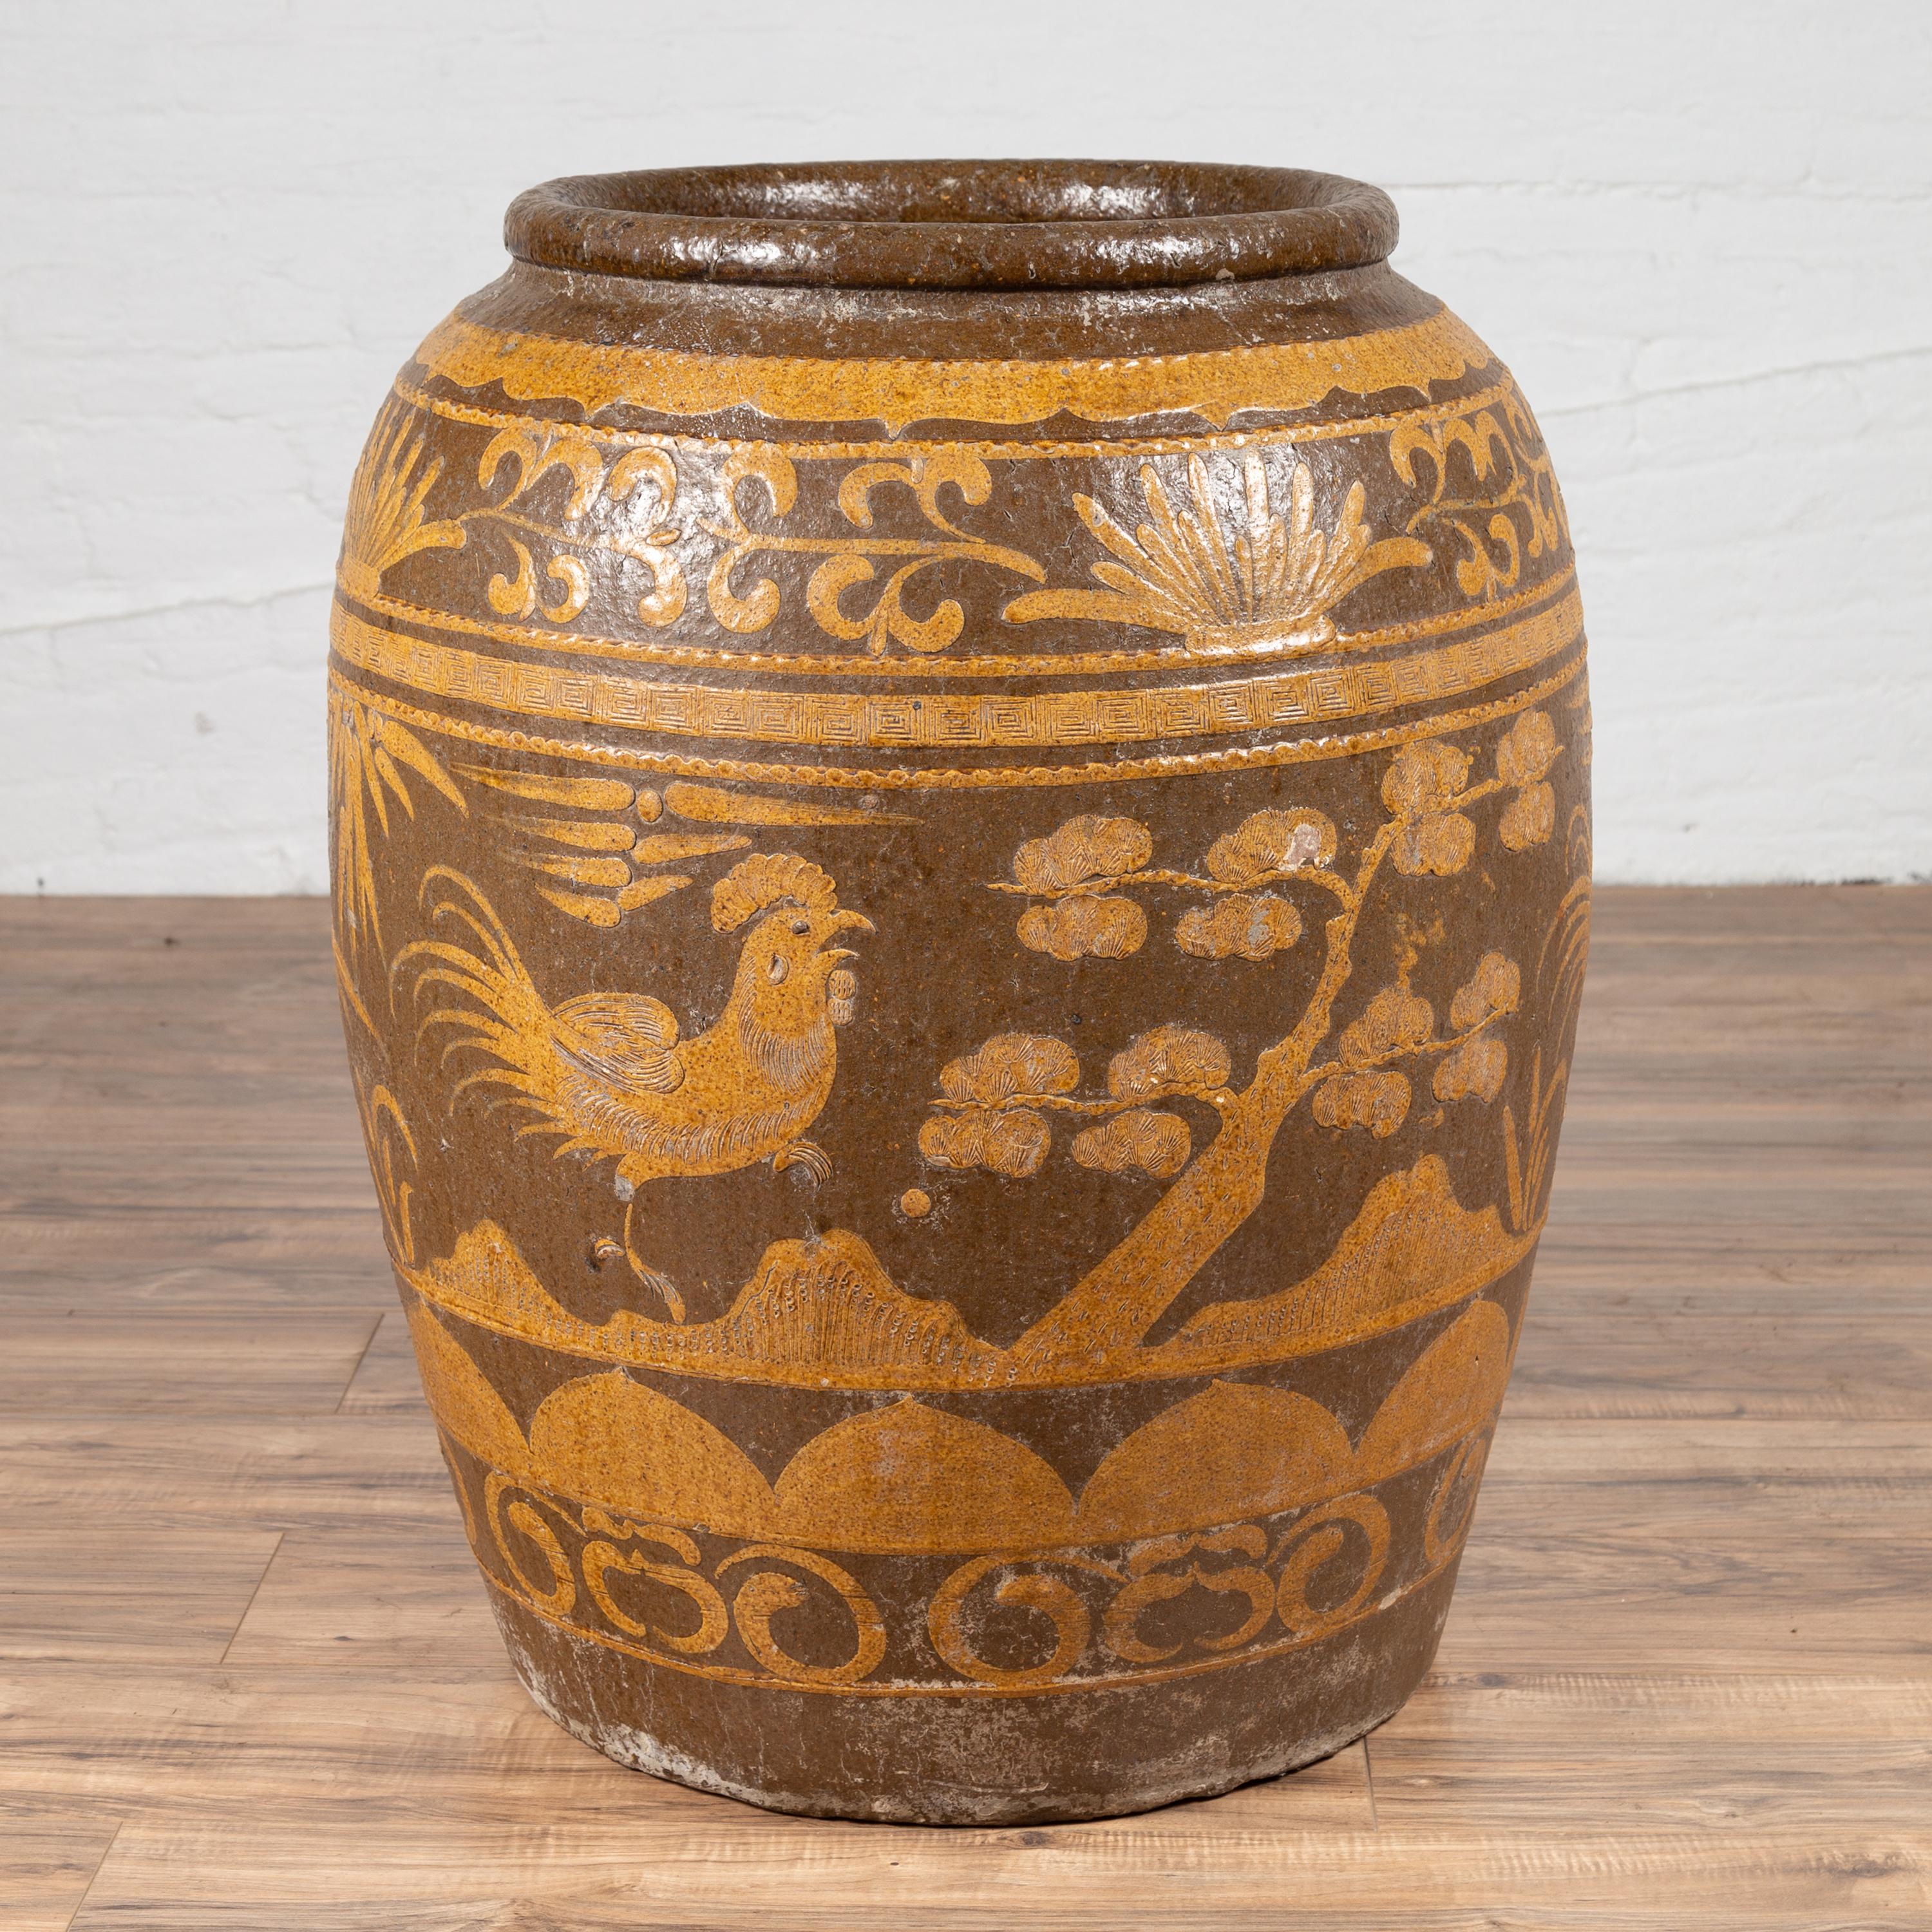 A large Chinese antique jar from the turn of the century, with mustard glaze and floral and bird motifs. Born in China in the early years of the 20th century, this charming jar features a barrel shaped body, adorned with a mustard glaze featuring